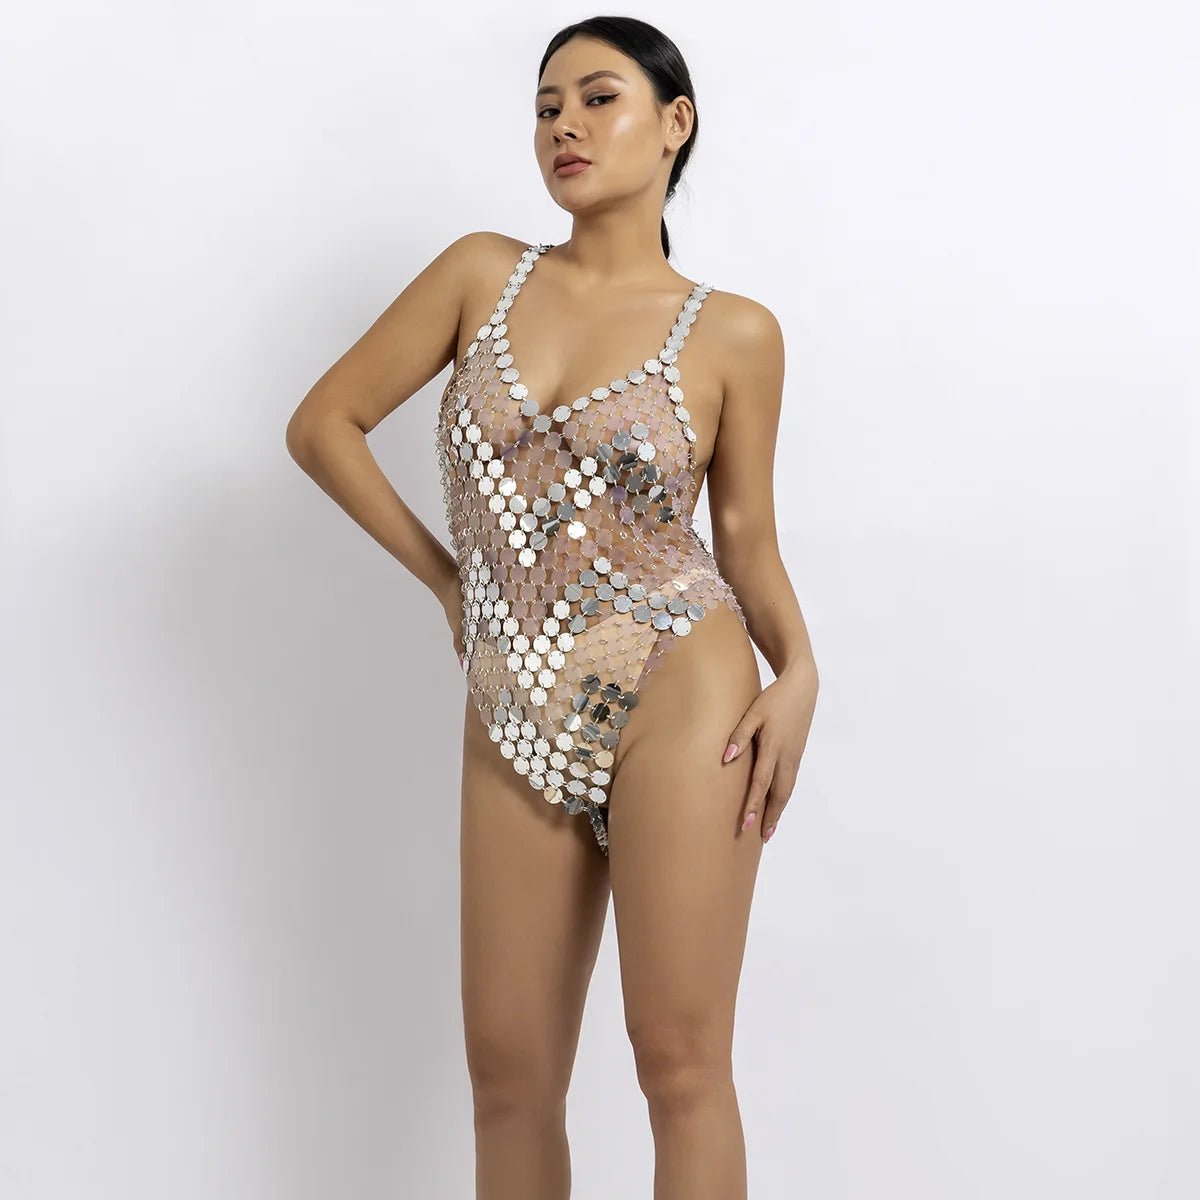 Glitter Sequined Mirror Chain Bodysuit - The Rave Cave